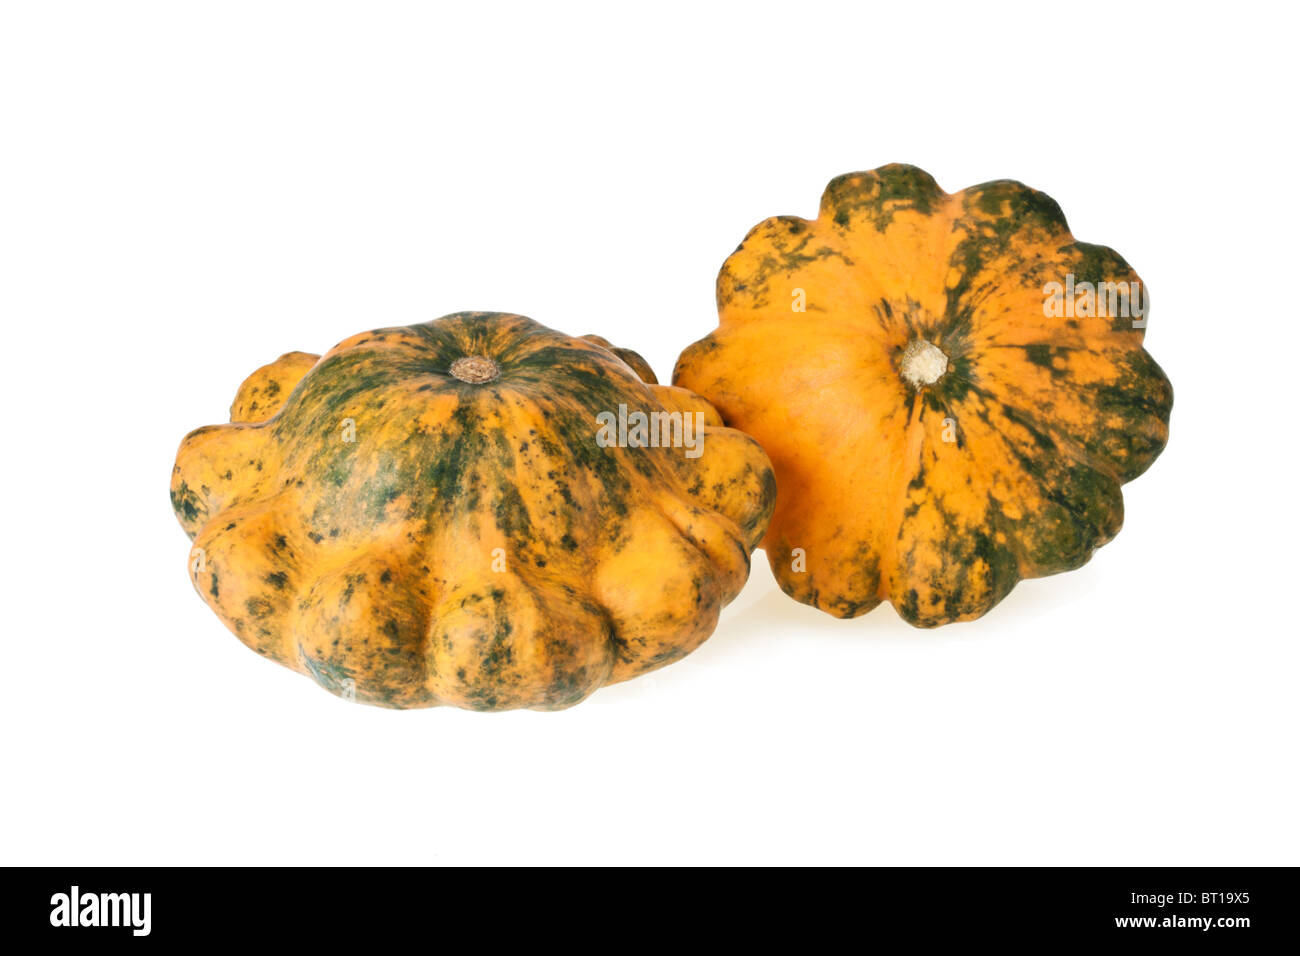 Two motley colorful scalloped squashes isolated on white Stock Photo